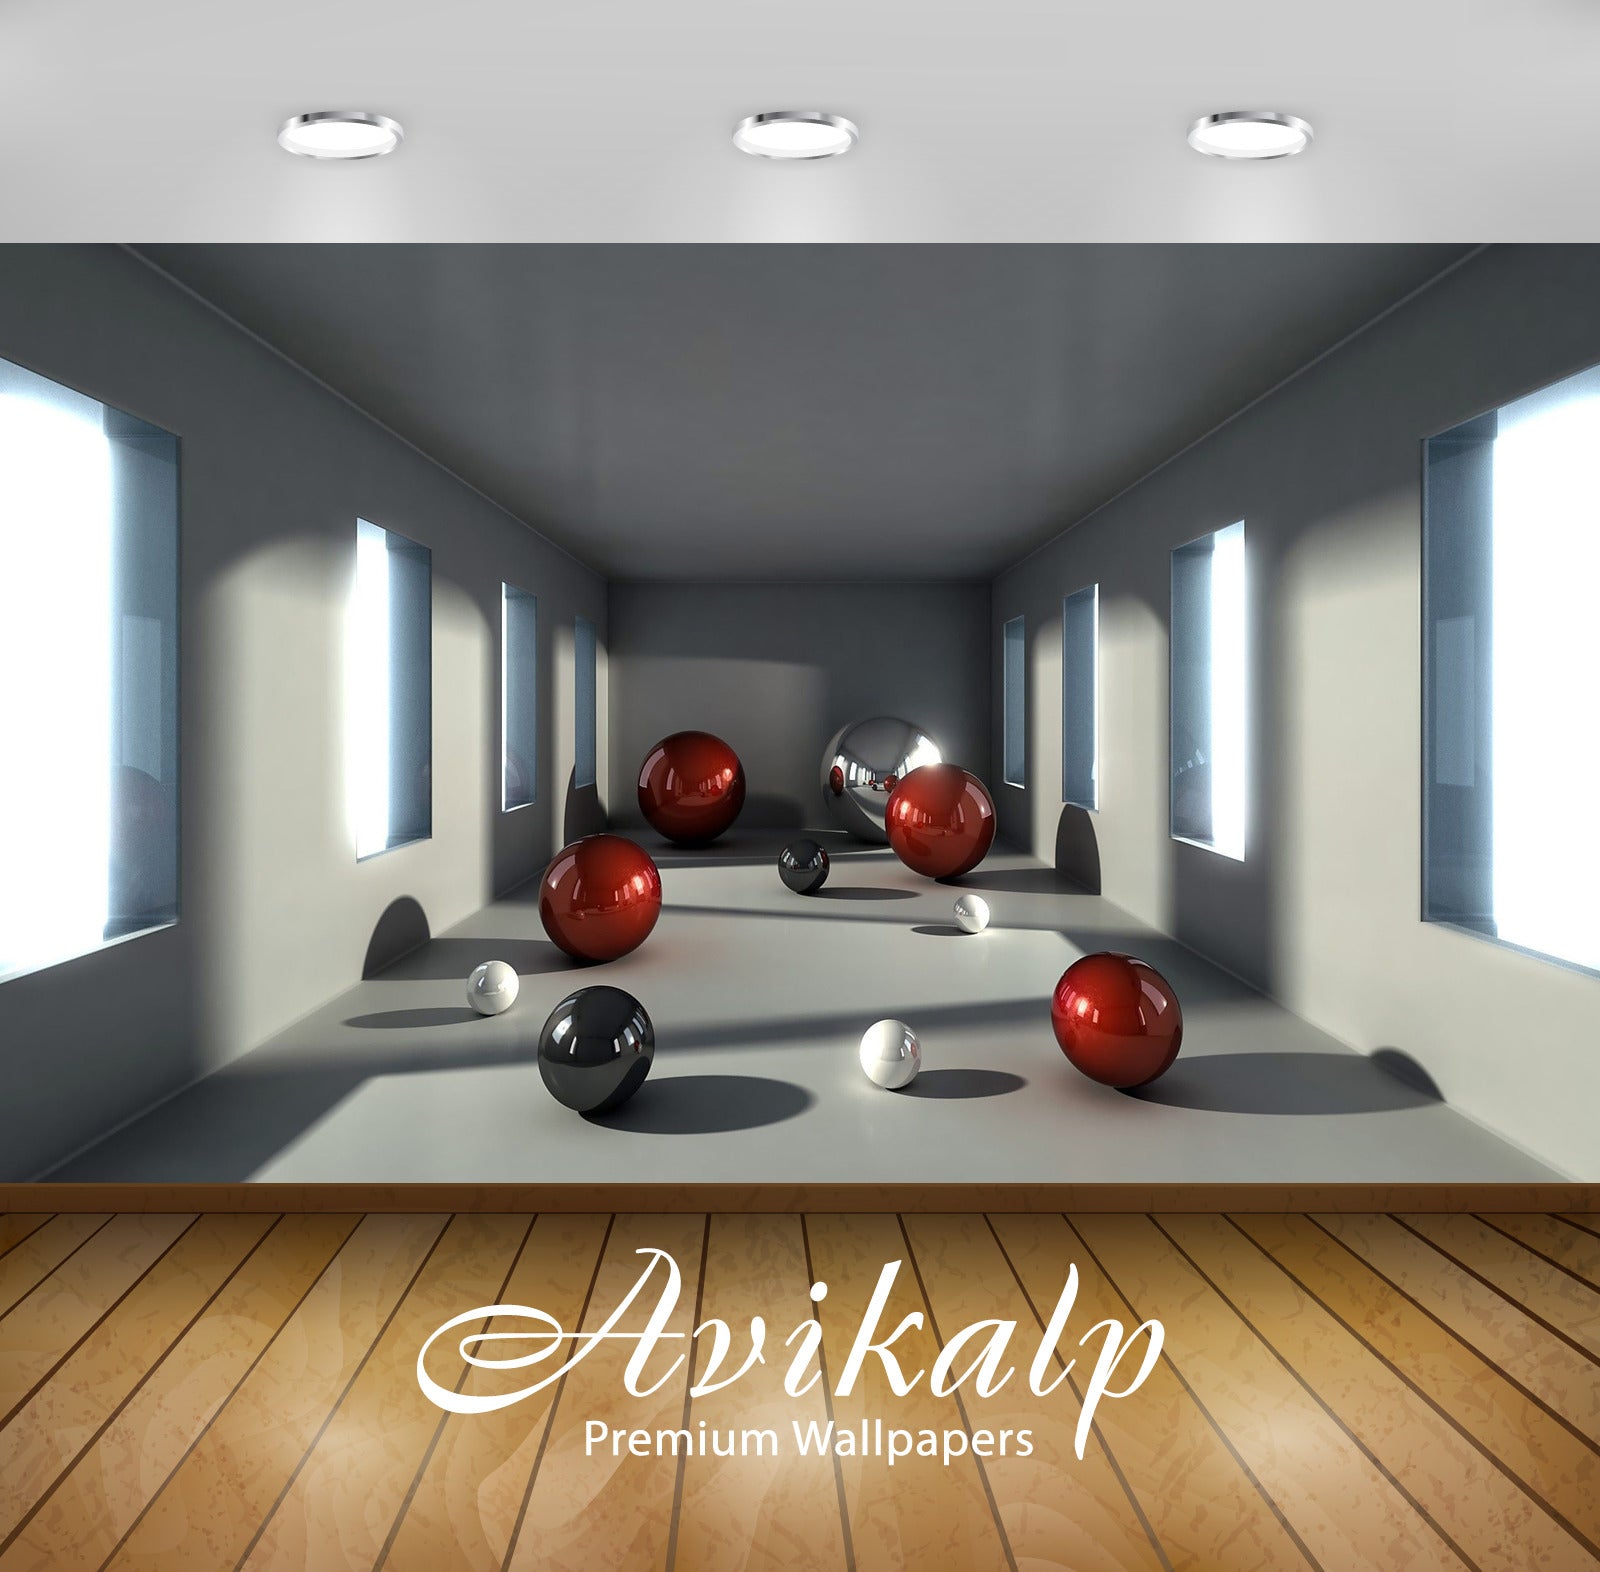 Avikalp Exclusive Awi3962 Spheres In Narrow Room Full HD Wallpapers for Living room, Hall, Kids Room